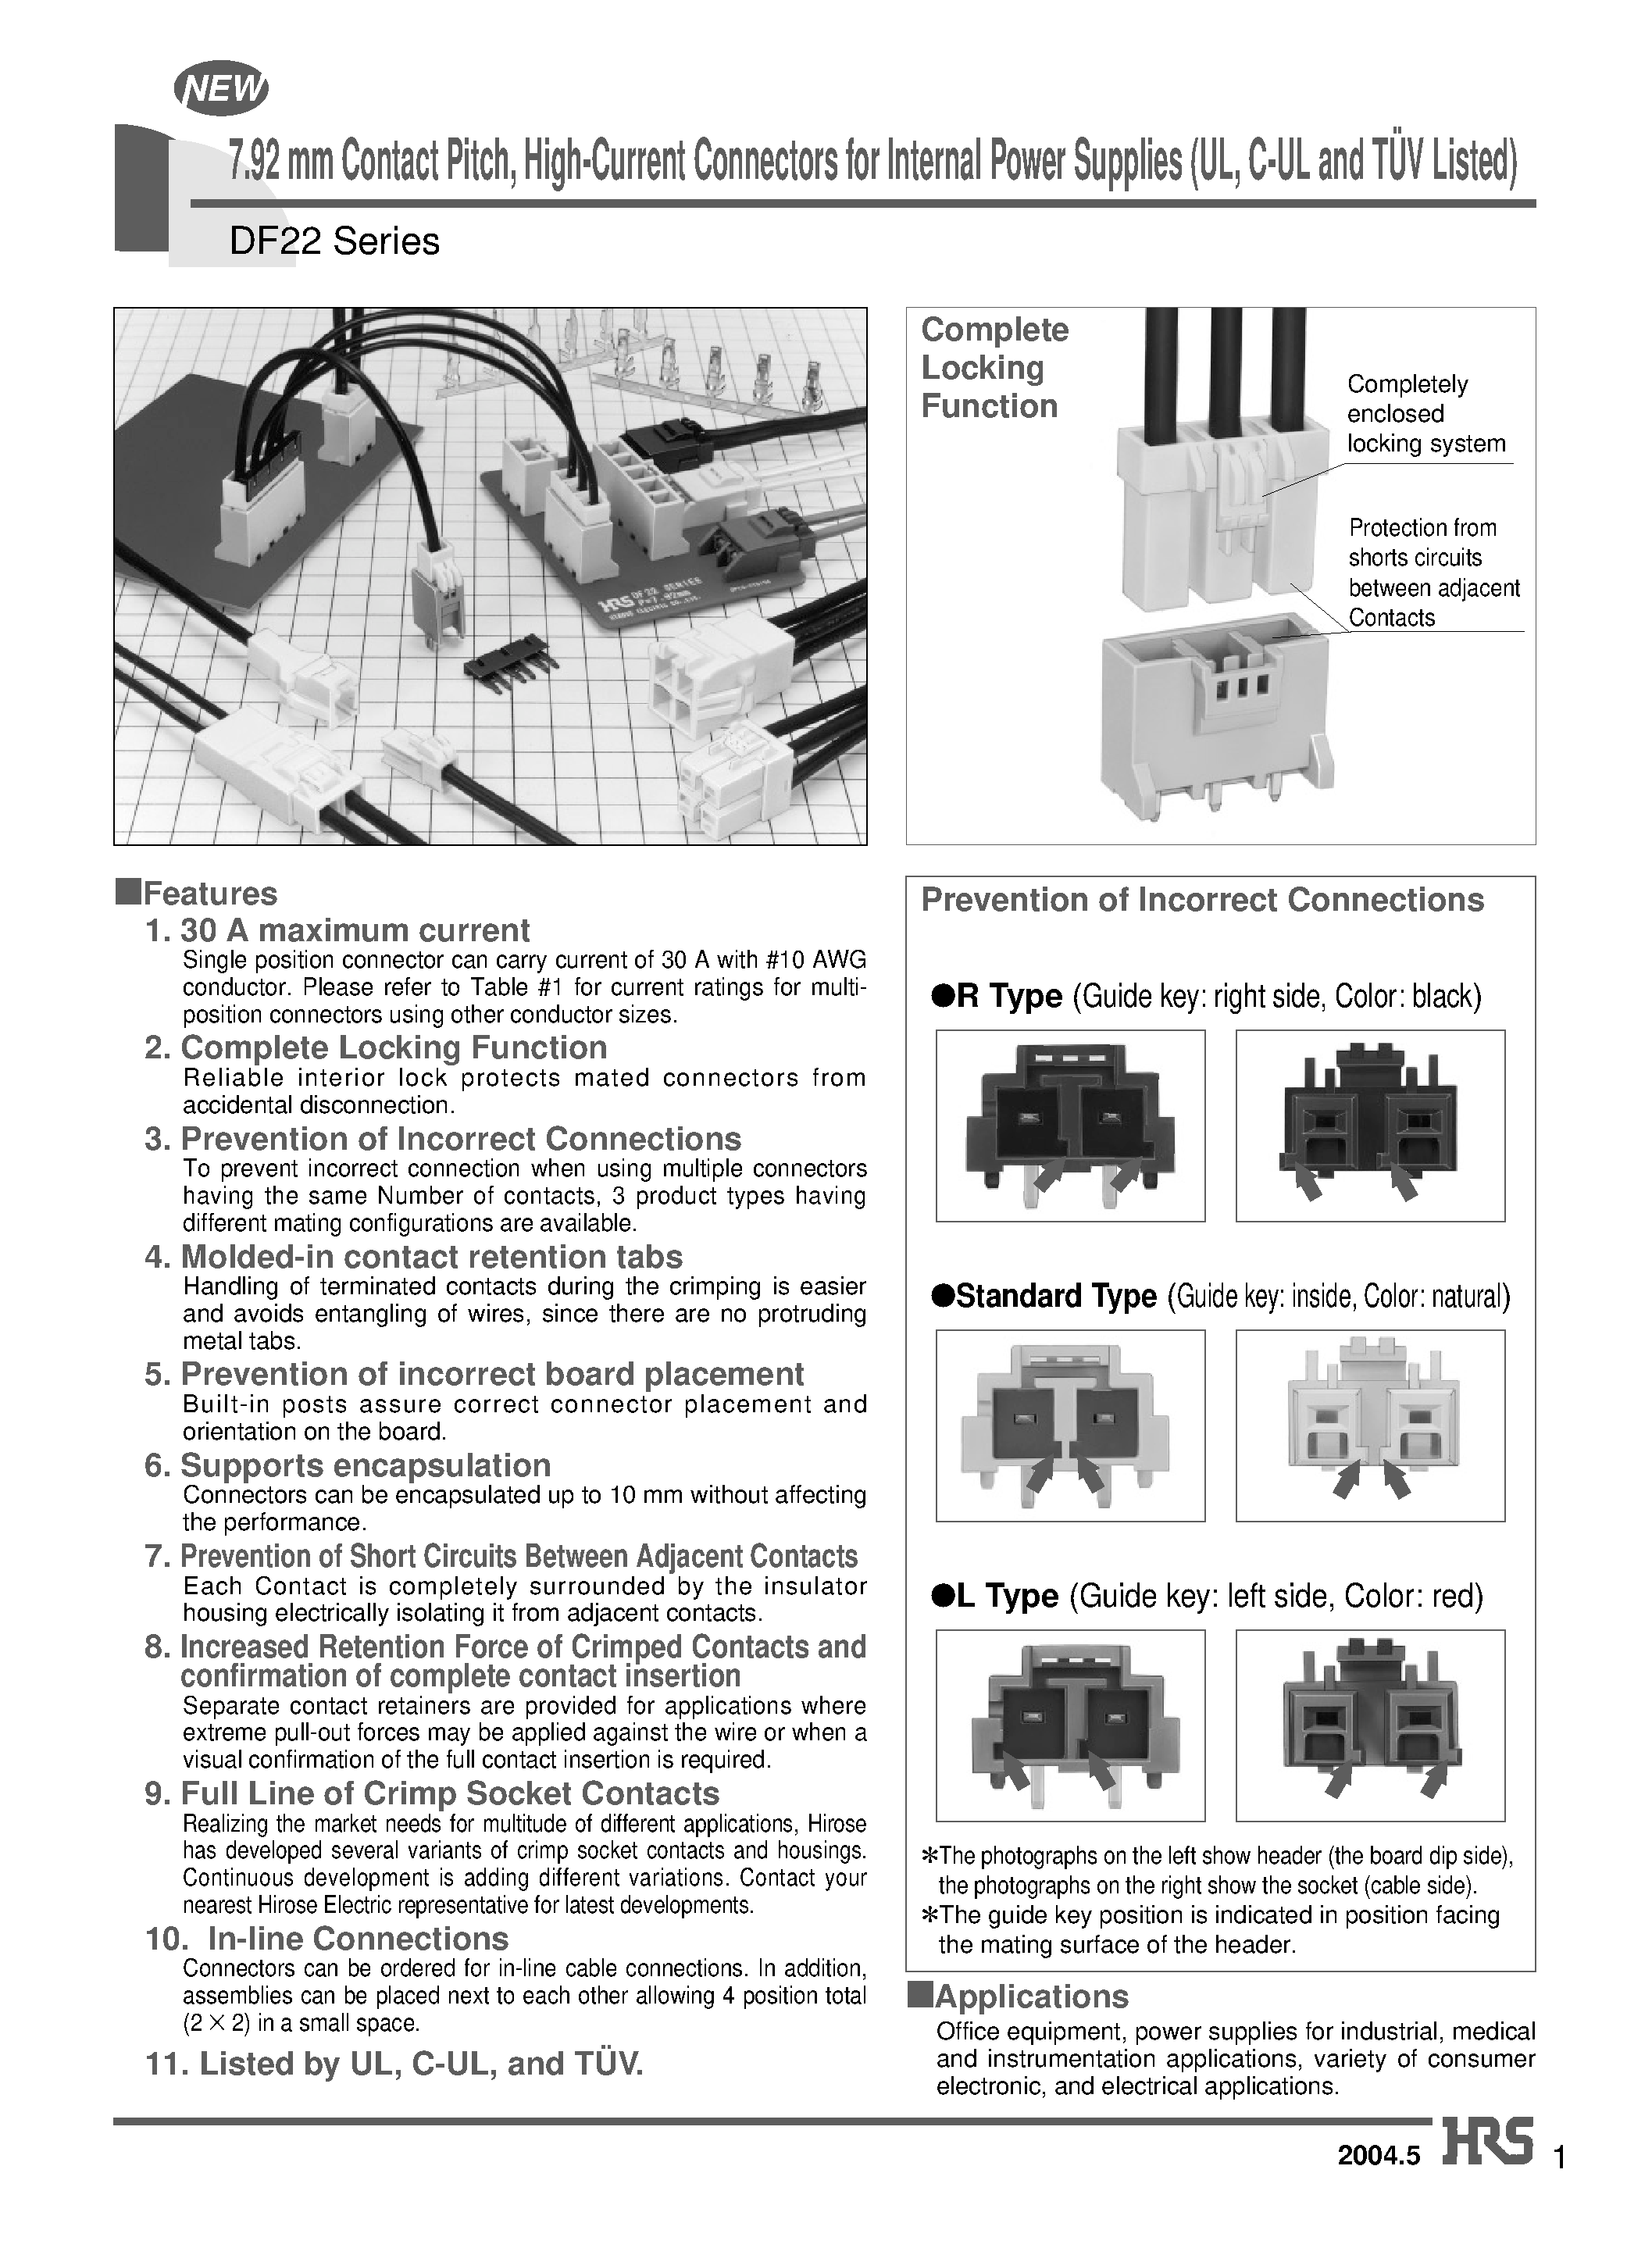 Даташит DF22BR-1P-7.92C - 7.92 mm Contact Pitch/ High-Current Connectors for Internal Power Supplies (UL/ C-UL and TUV Listed) страница 1